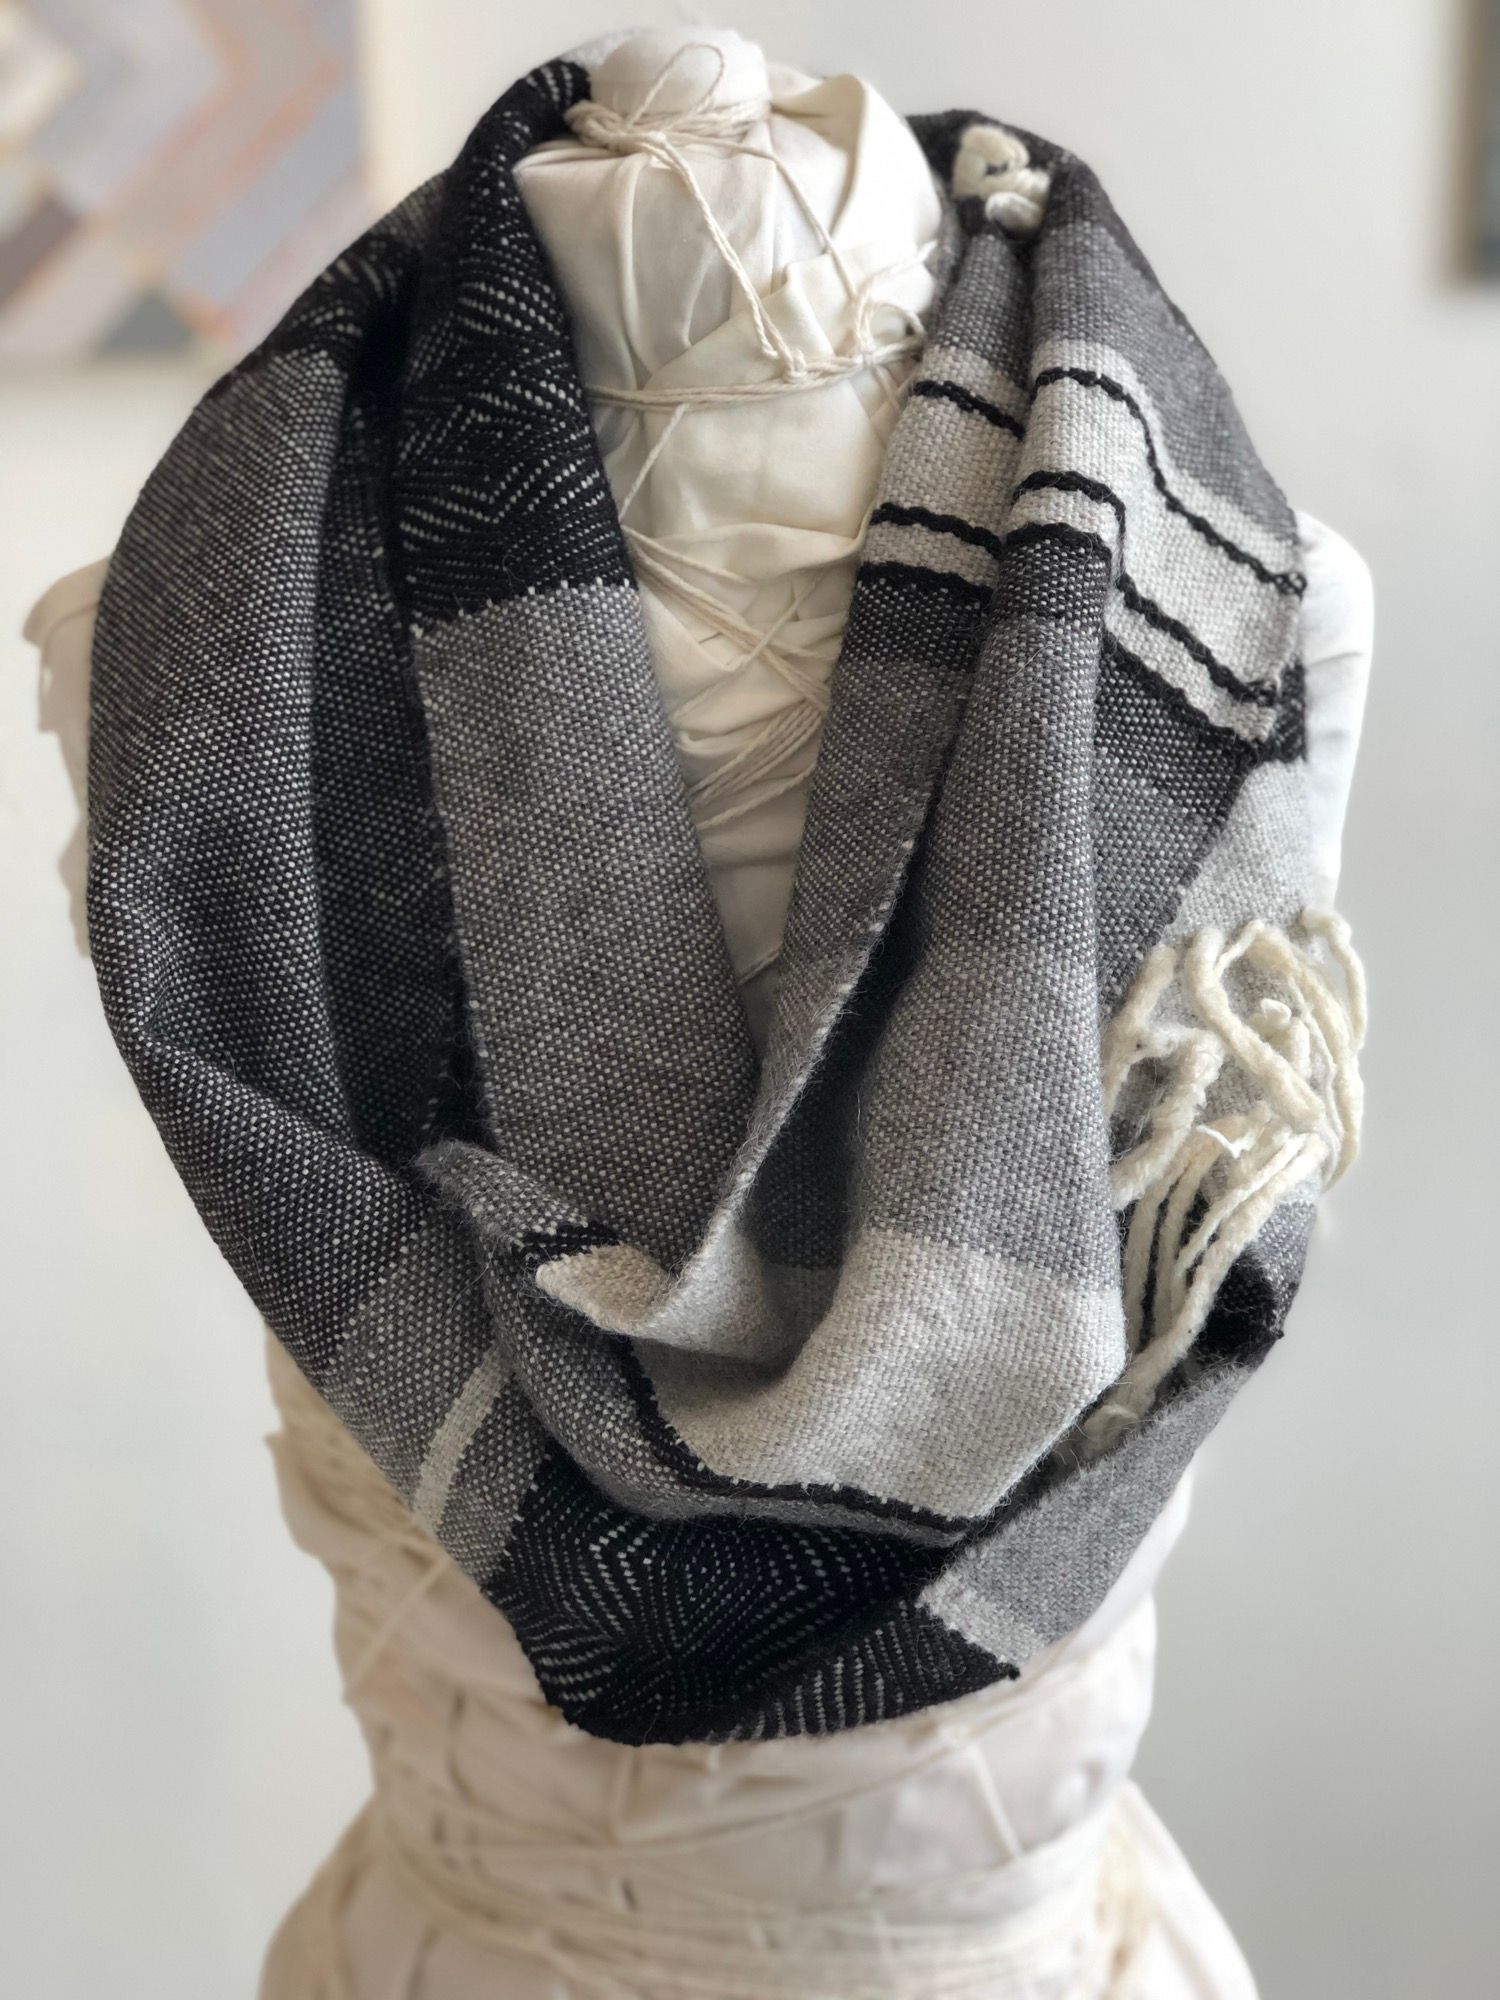 grey, black and white handwoven cowl scarf with fringe on a white mannequin in a white walled gallery